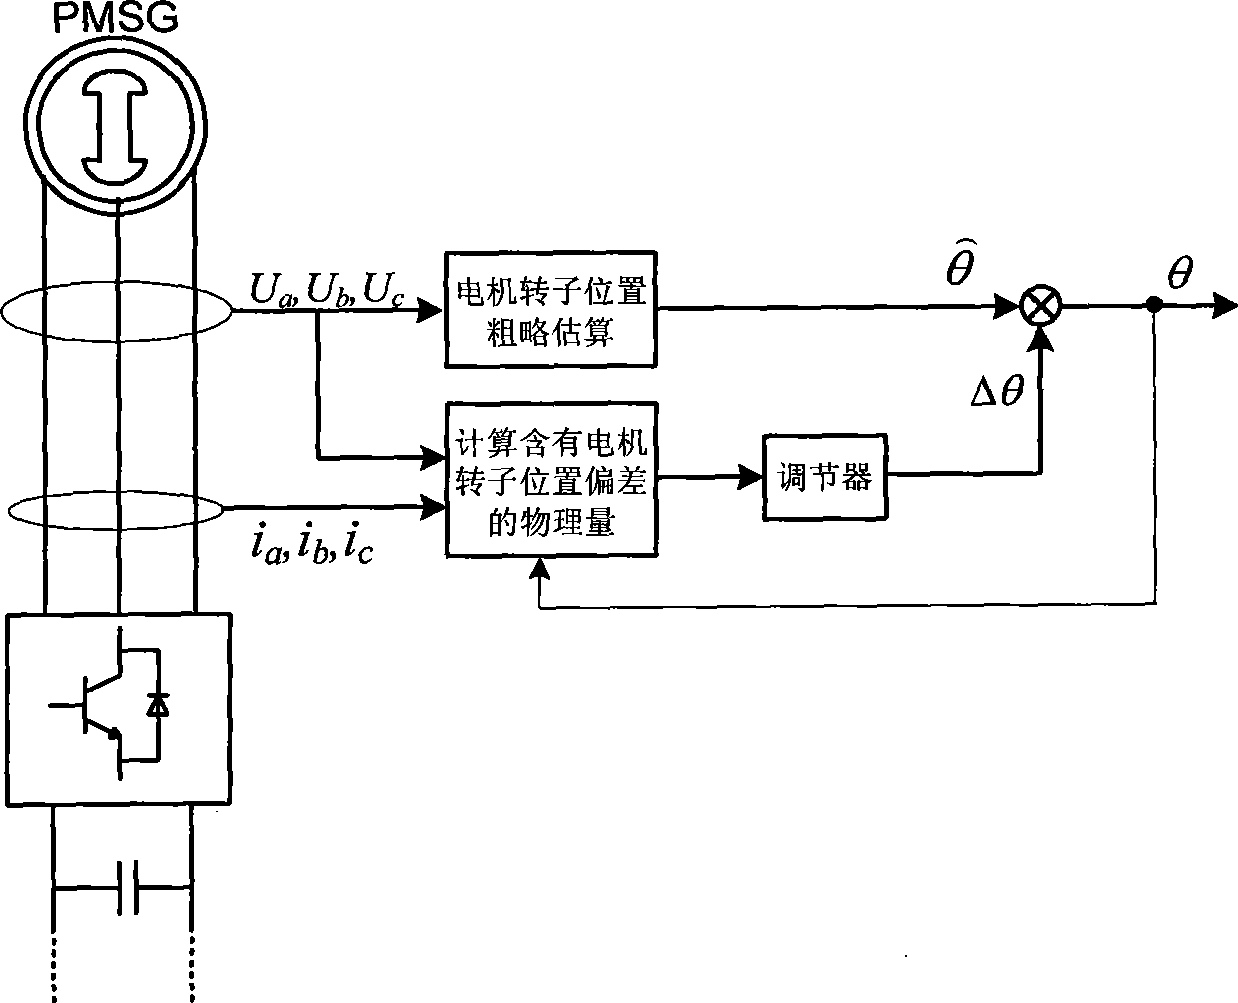 Rotor position estimation and correction method for permanent magnet synchronous generator